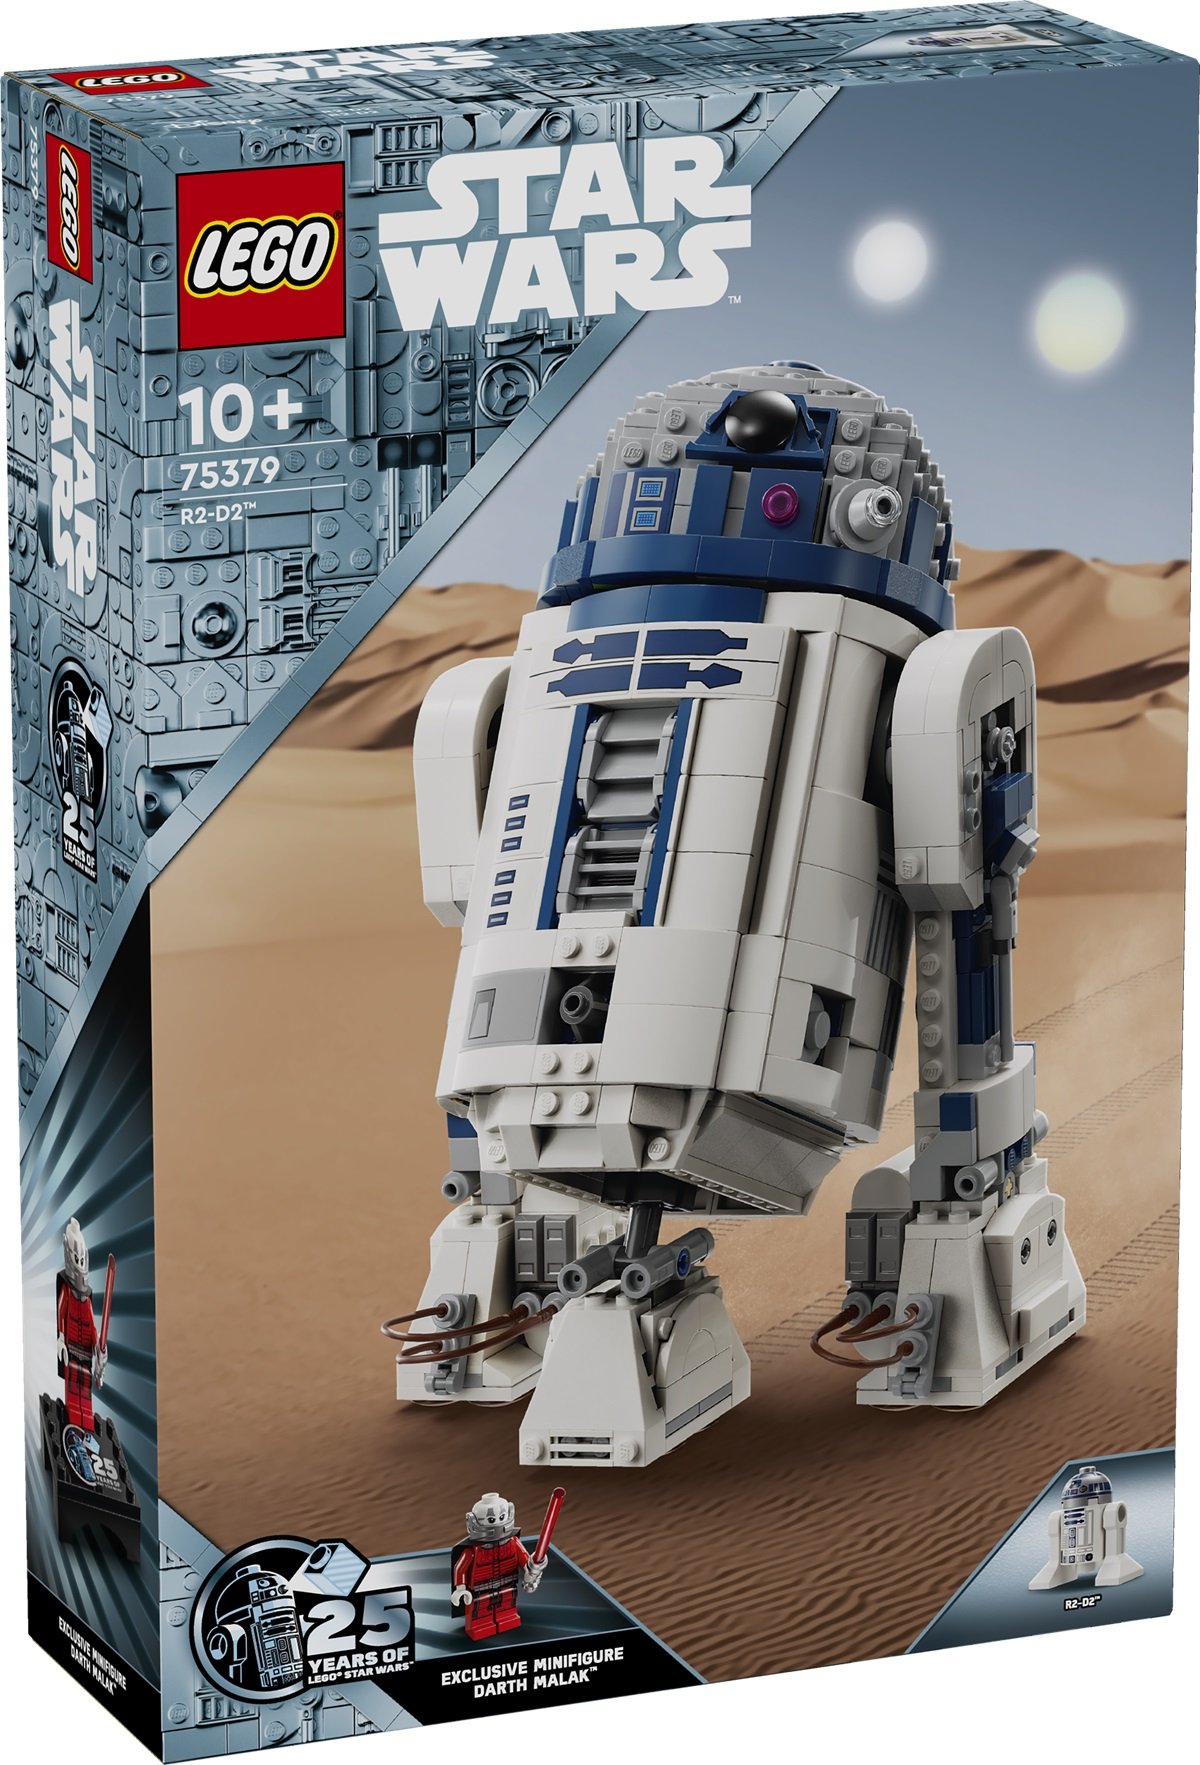 LEGO Star Wars 25th Anniversary R2-D2 packaging.